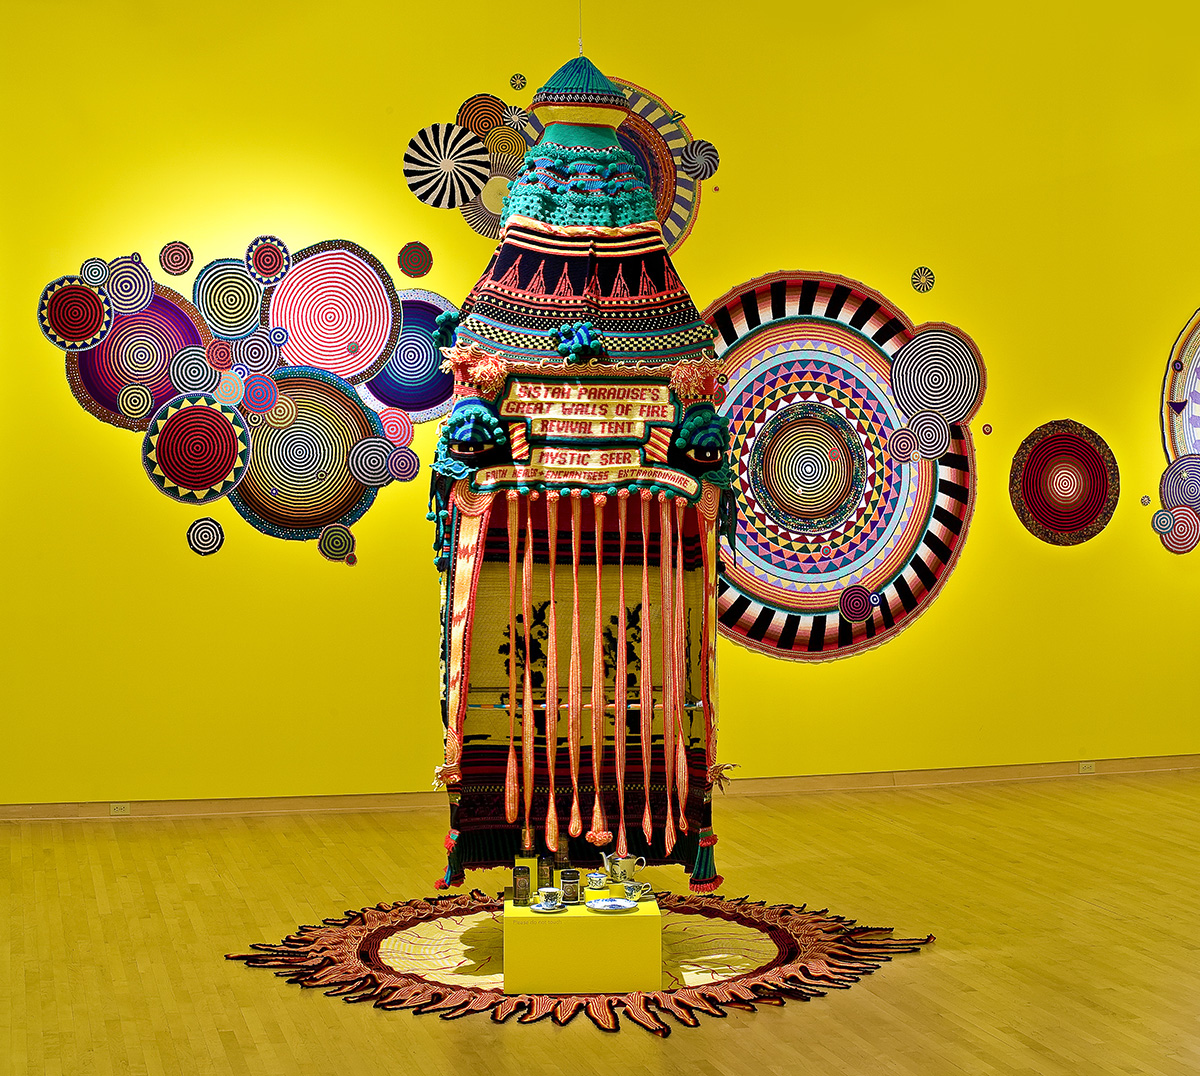 Xenobia Bailey, Sistah Paradise's Great Wall of Fire Tent (installation view, John Michael Kohler Arts Center), 1993; acrylic and cotton yarn and mixed media. Courtesy of the artist.